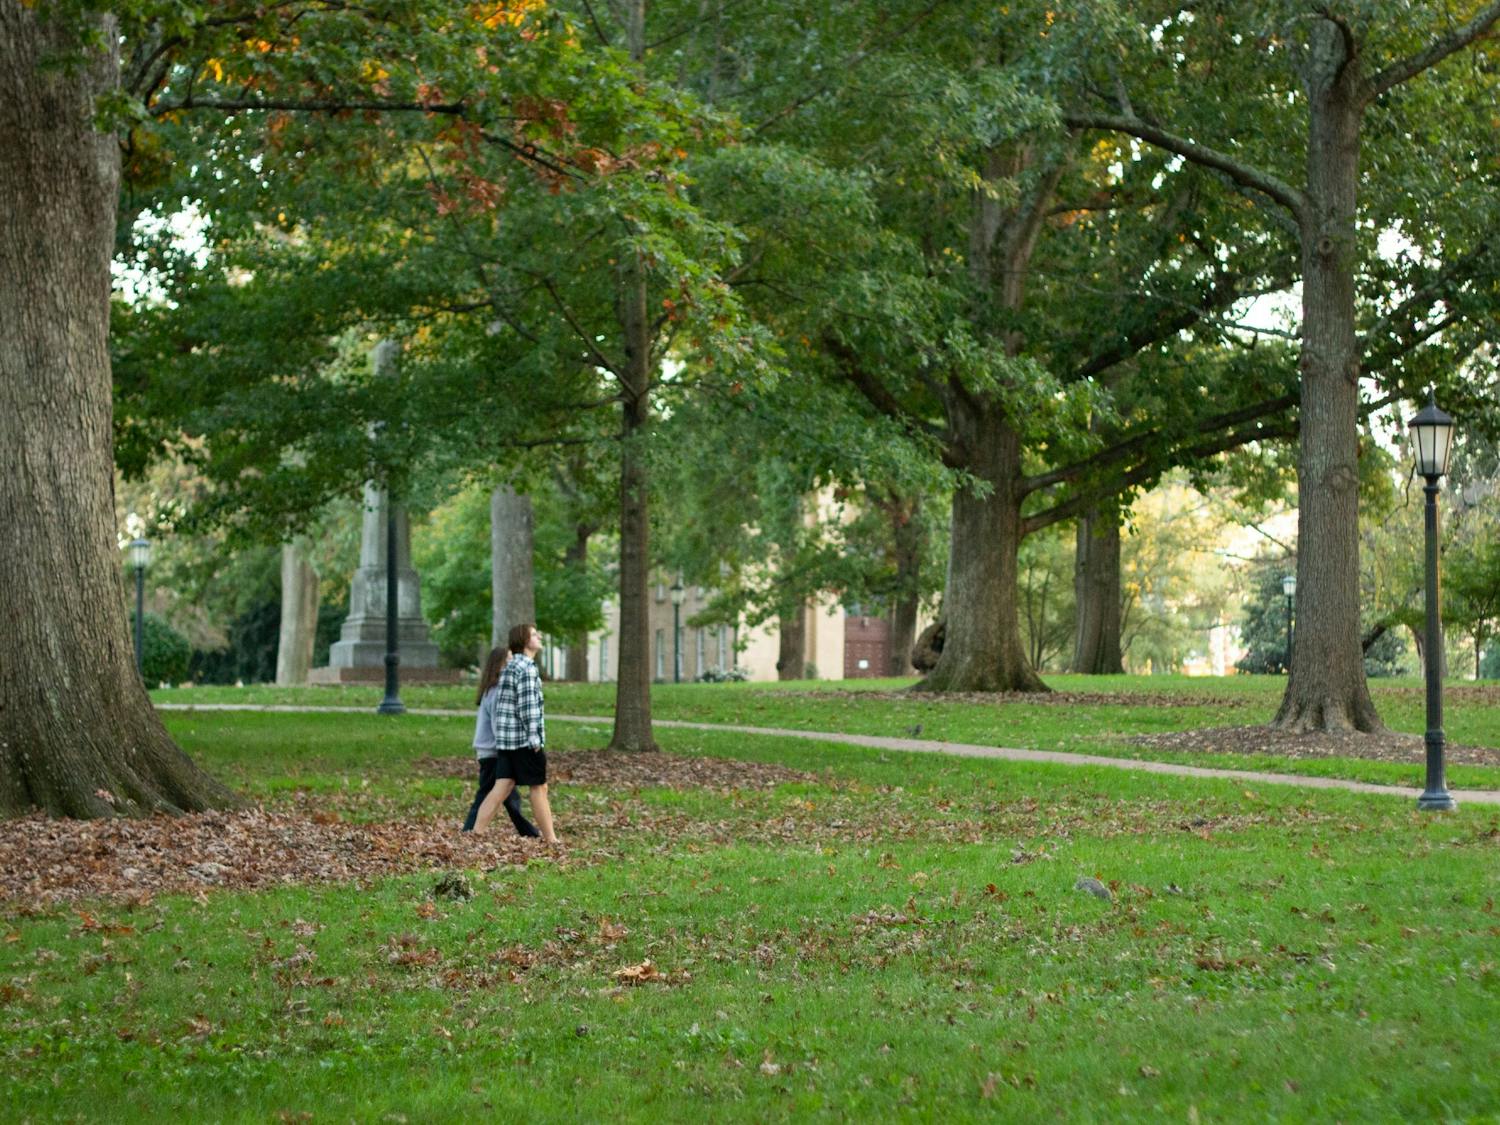 UNC students stroll through McCorkle place on North Campus on Tuesday, Oct. 27th, 2020.